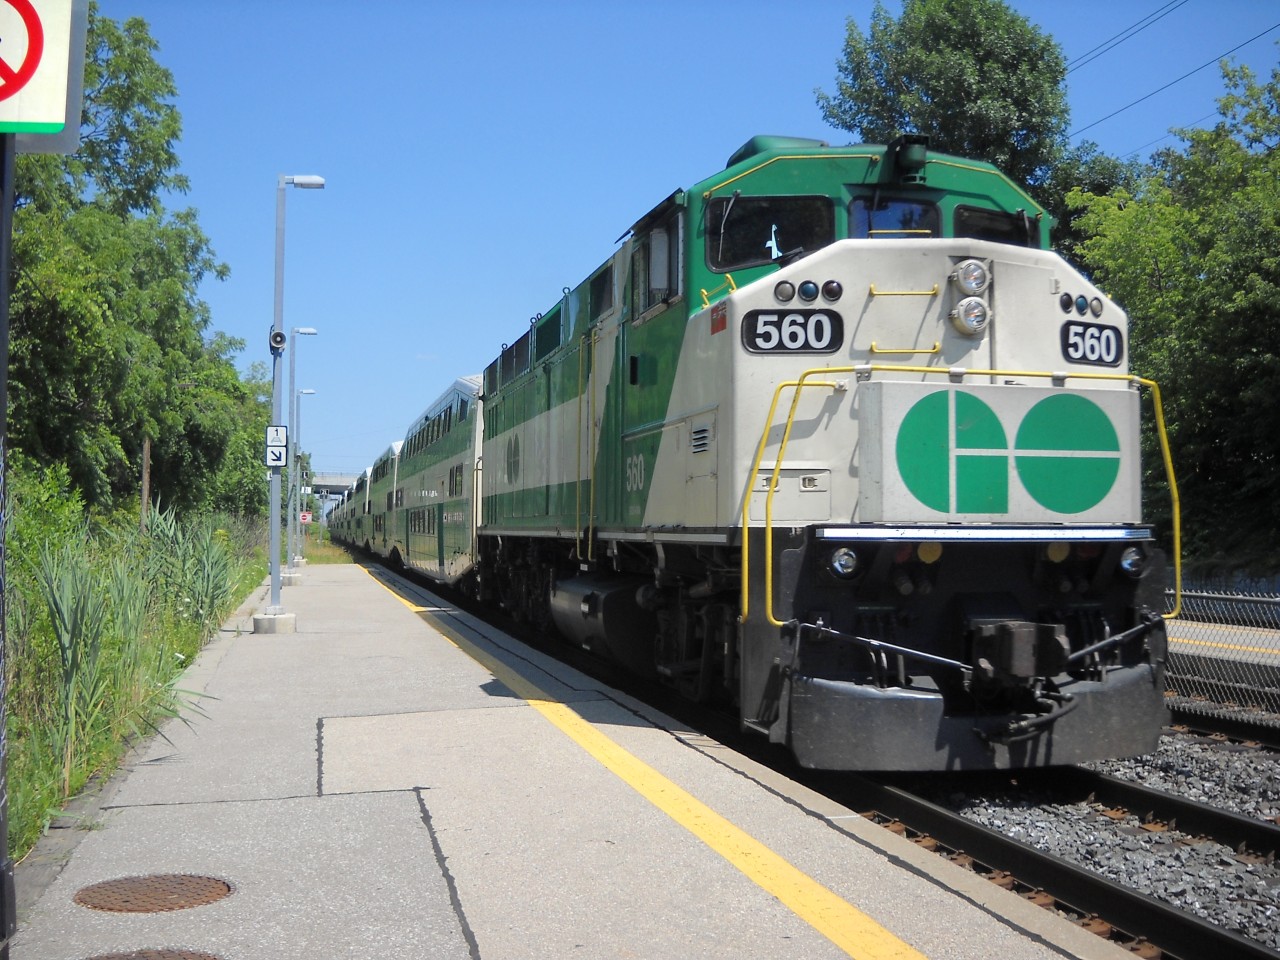  RevEd Photo: GO Transit F59PH #560, one of the last F59PH  units in its fleet, is shown heading west as it pulls into Long Branch  station with a 10 car